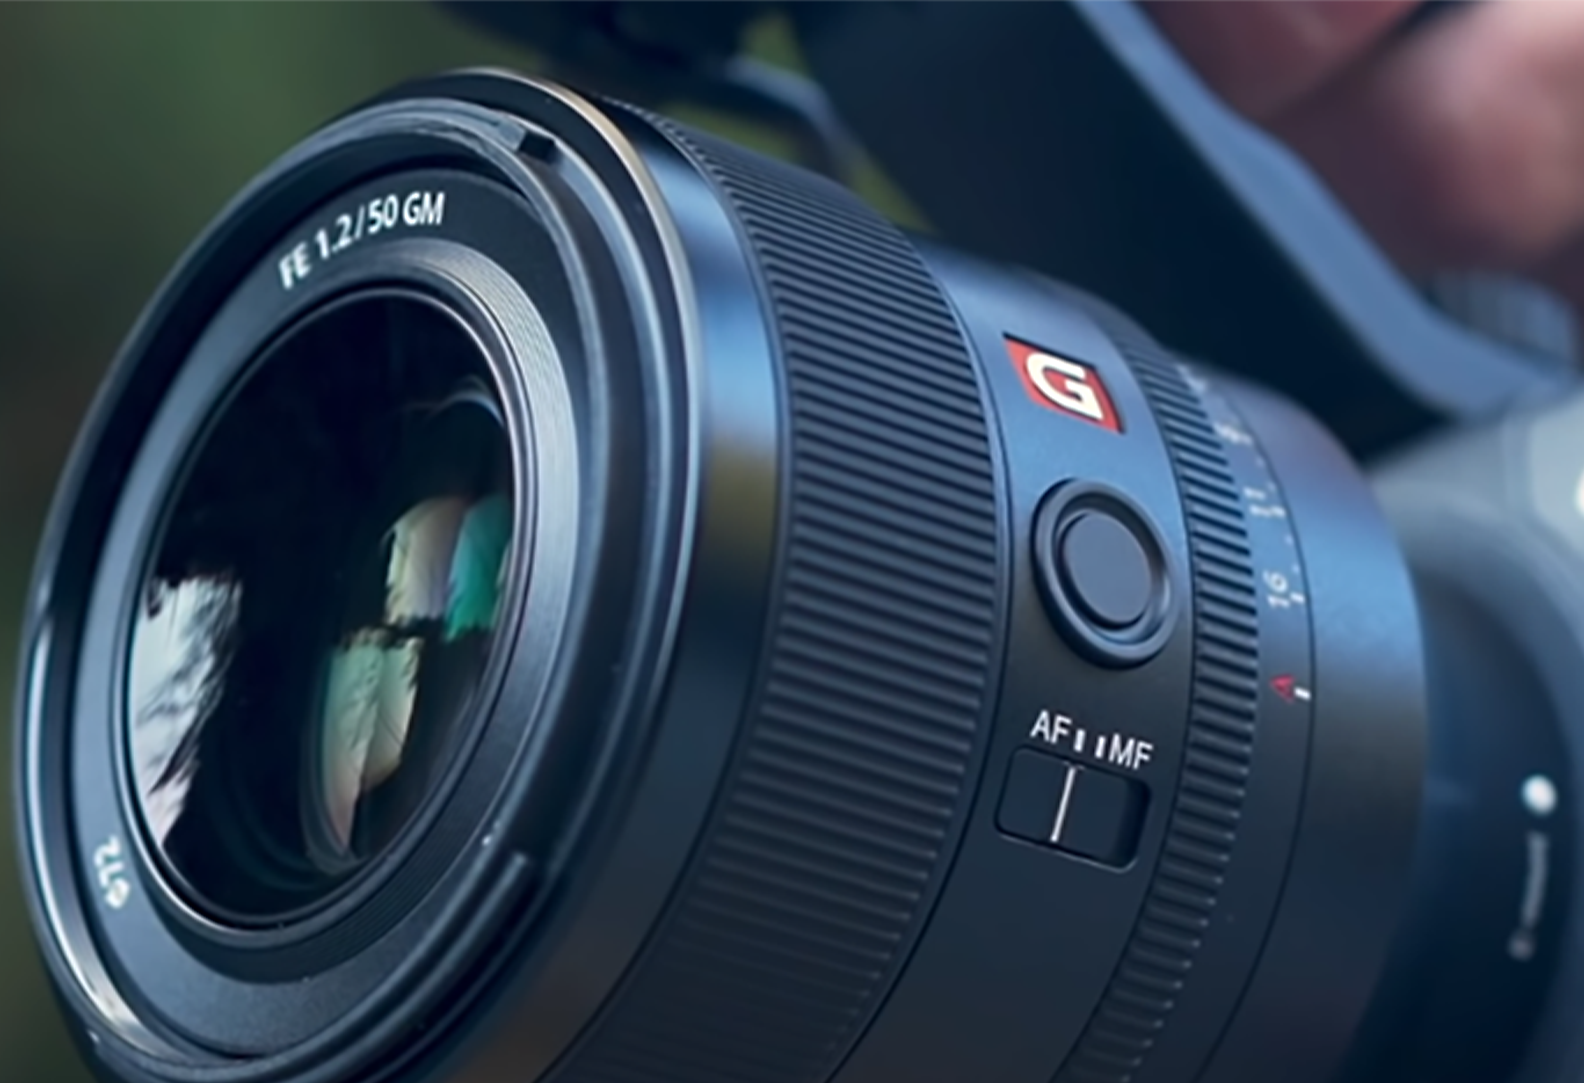 Advantages of Sony’s lenses for video shooting